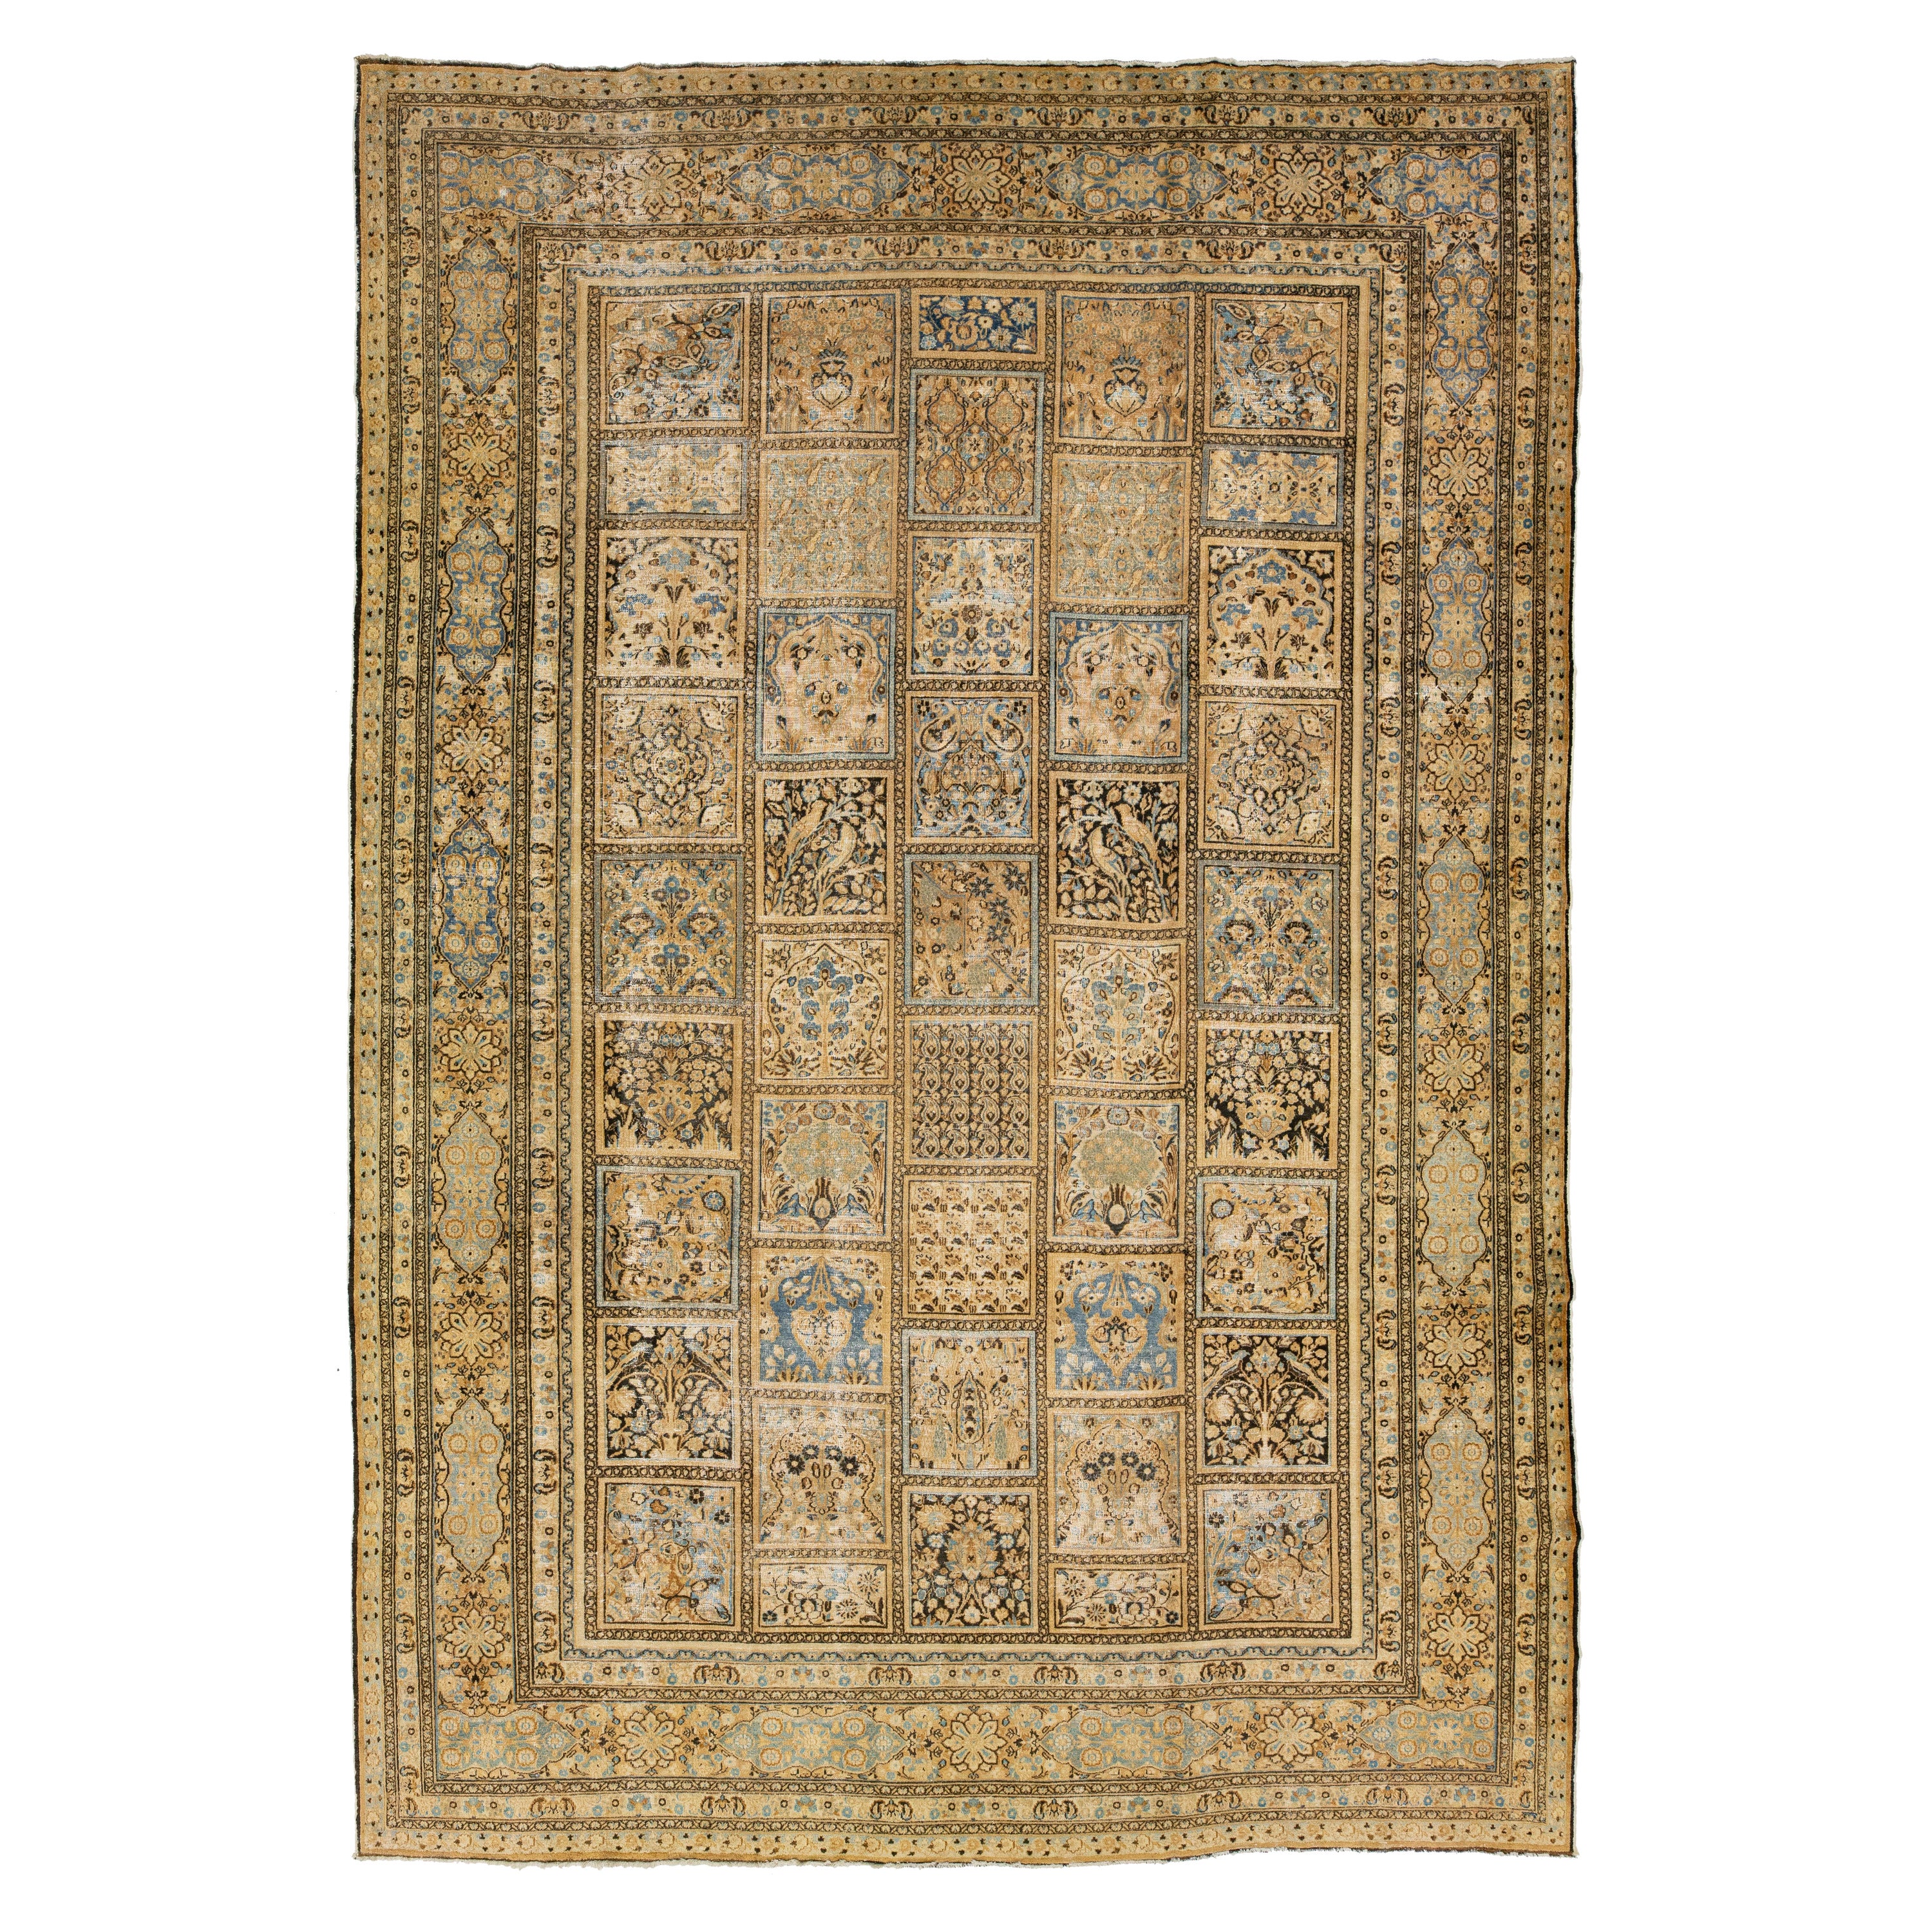 1900s Antique Persian Khorassan Wool Rug In Beige With Allover Pattern For Sale